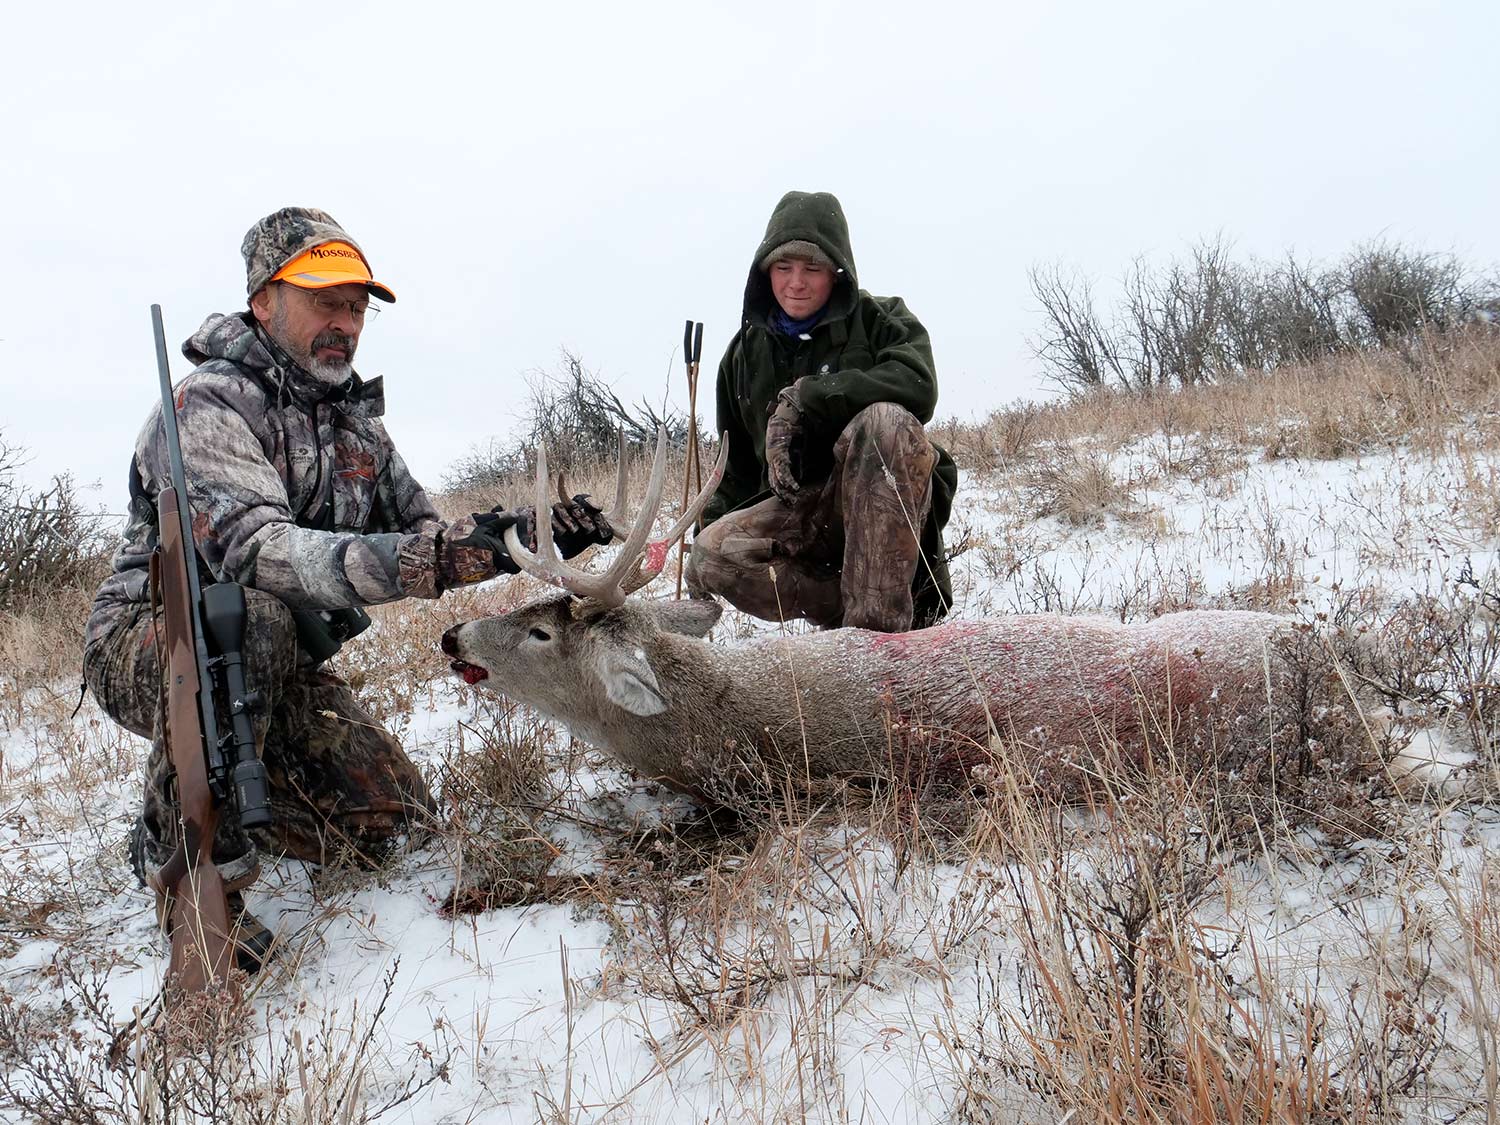 Two hunters kneeling behind a whitetail buck in the snow.